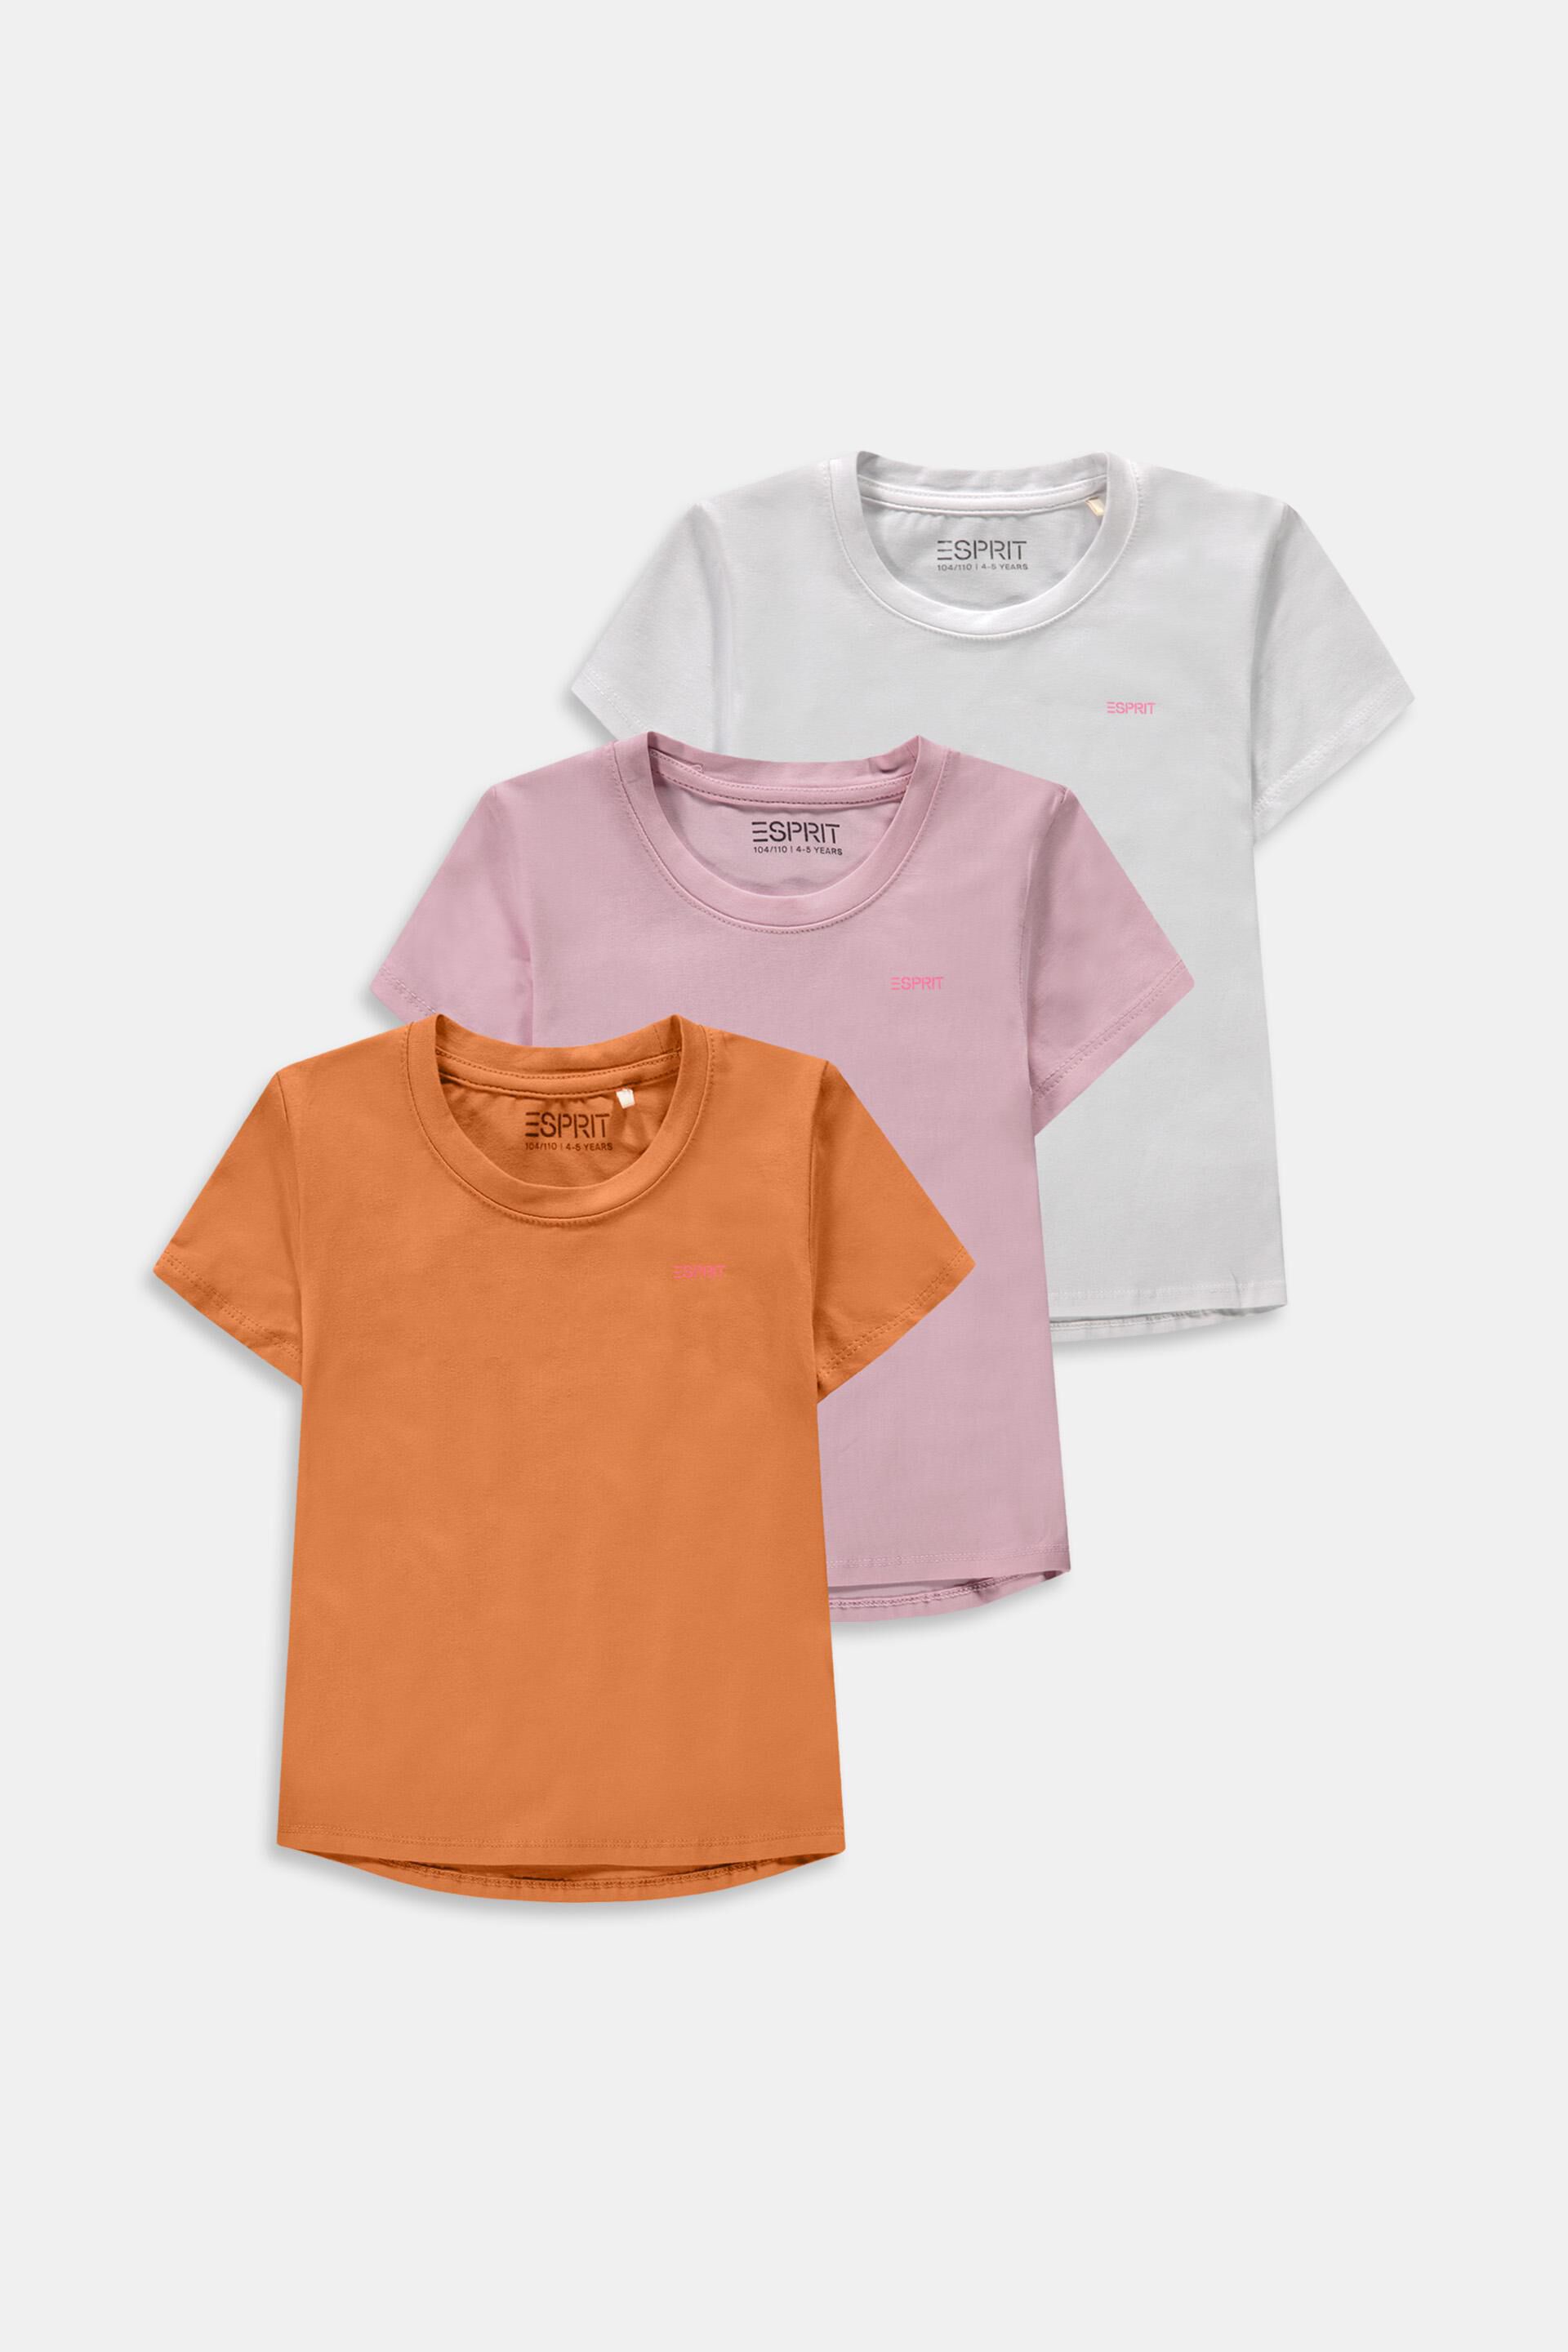 Esprit of 3-pack logo t-shirts print small